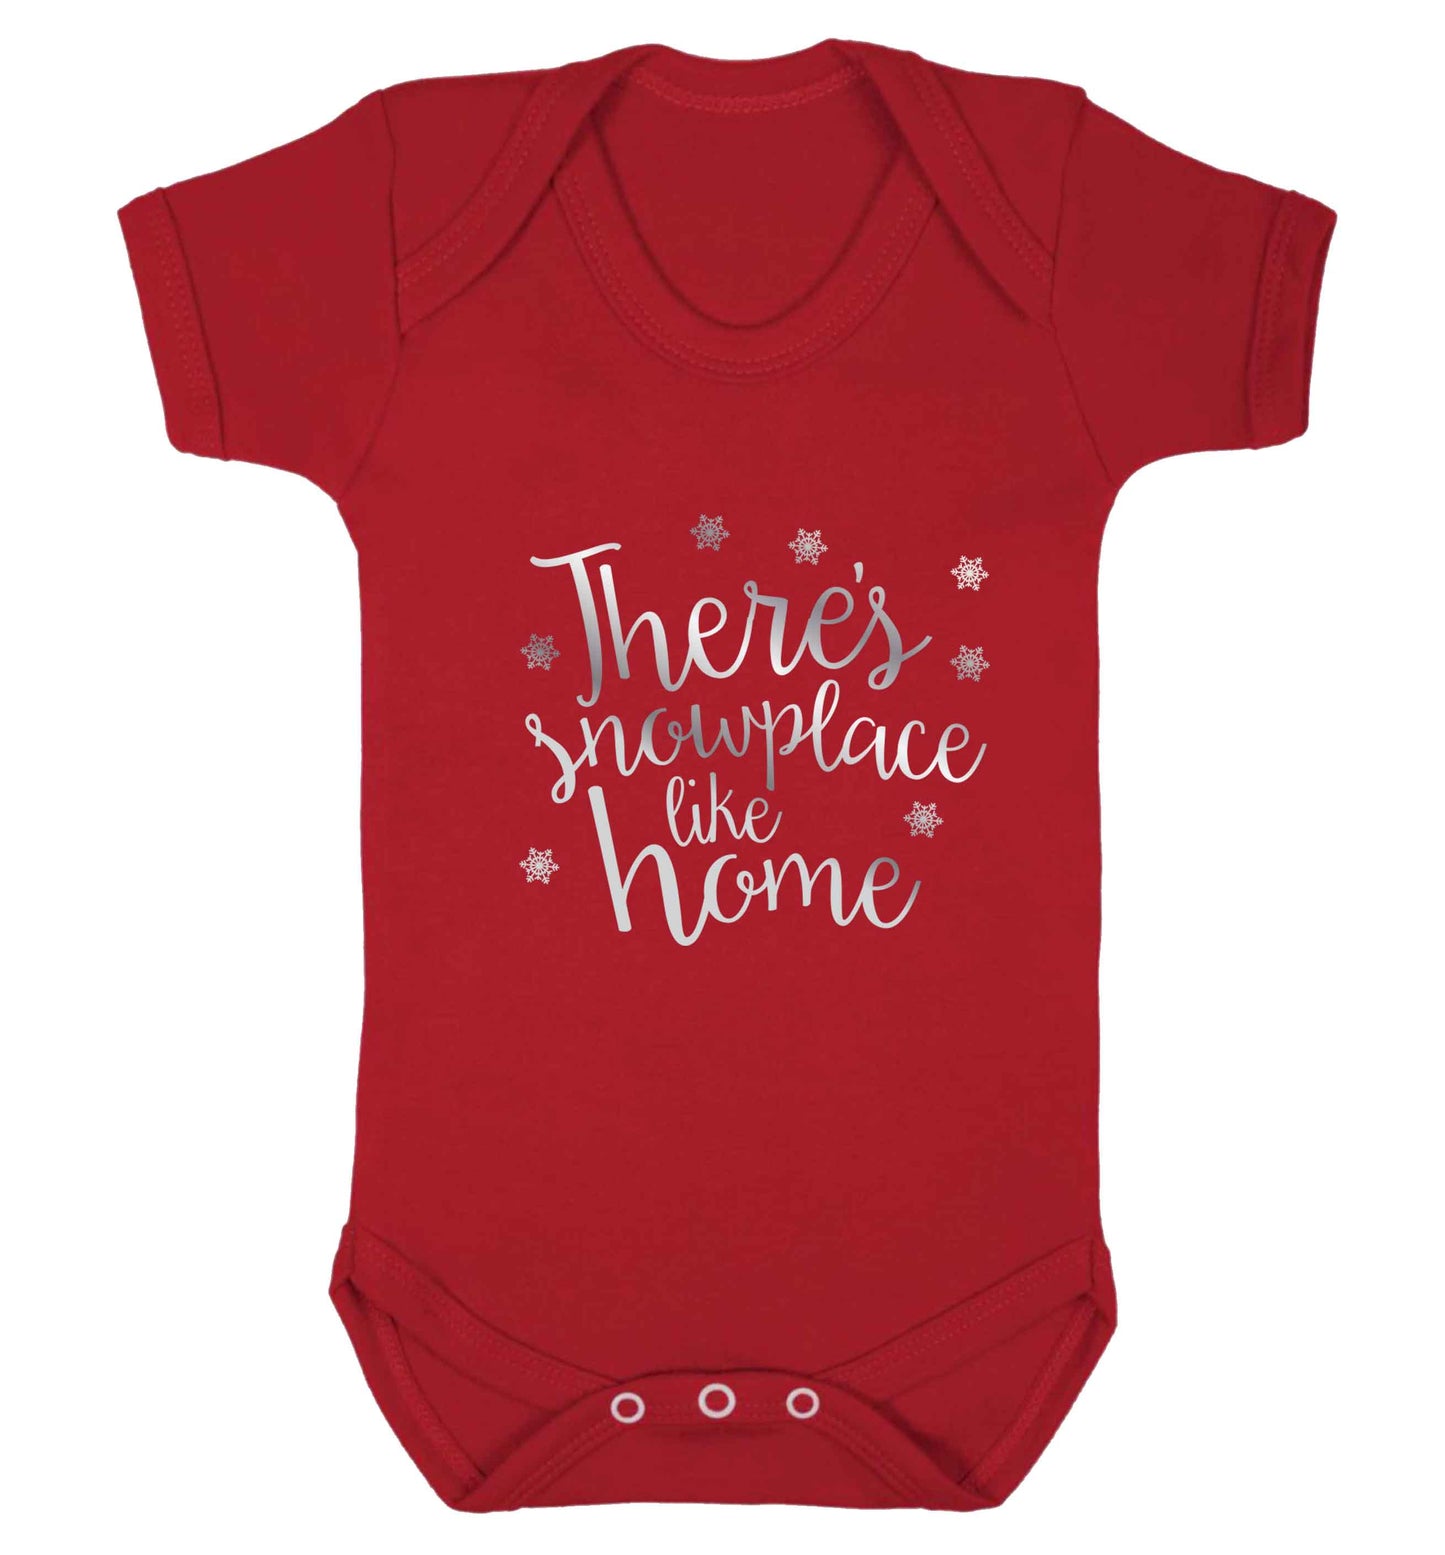 There's snowplace like home - metallic silver baby vest red 18-24 months